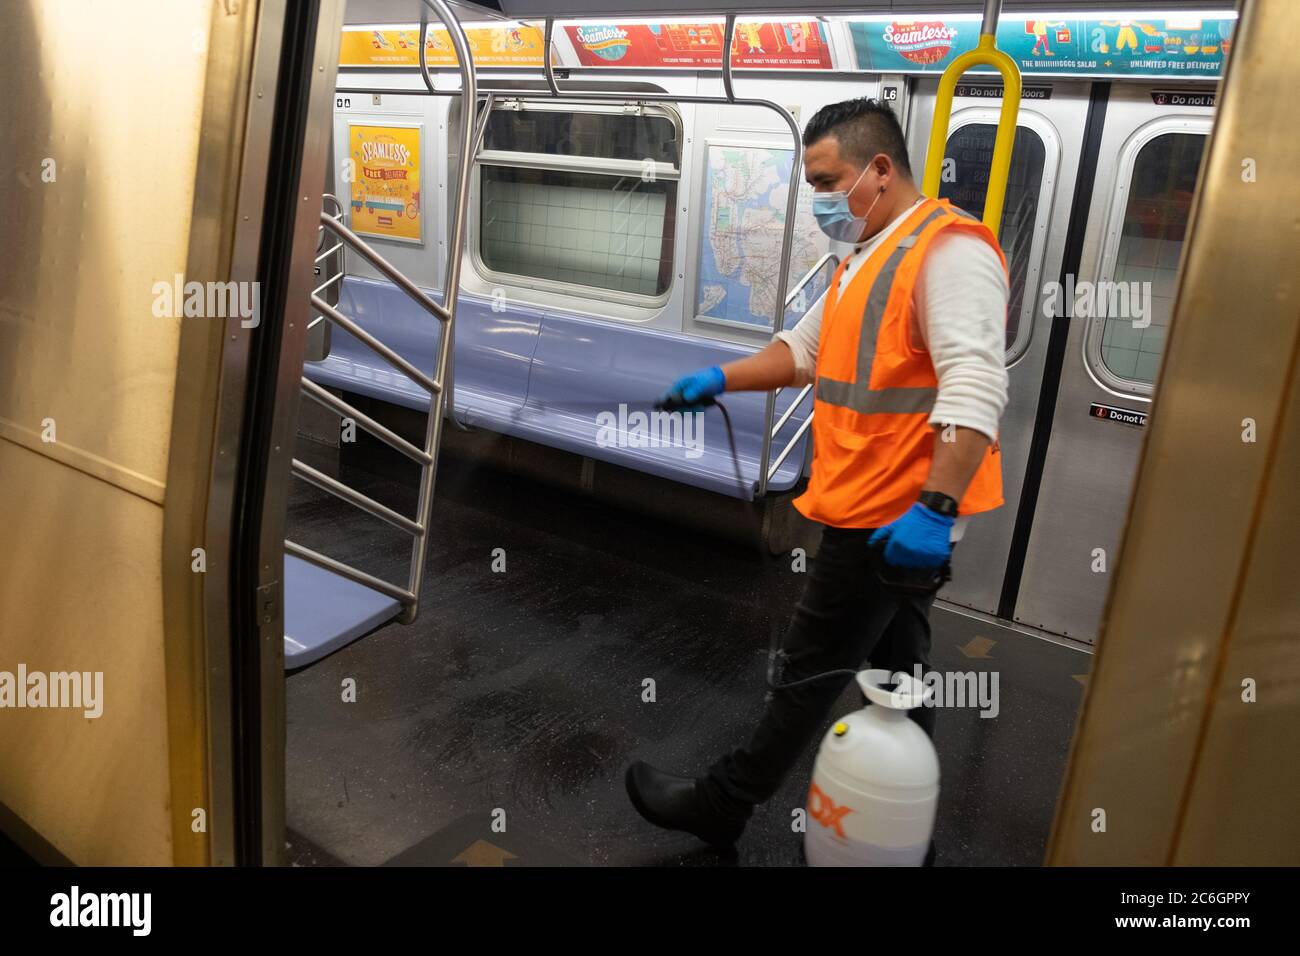 New York, United States. 08th July, 2020. A worker sprays a cleaning solution inside a subway car in Manhattan as the city enters phase 3 of reopening amid the coronavirus pandemic.As New York City enters phase 3 of reopening retail stores for indoor shopping, restaurants have been postponed for indoor dinning. Meanwhile Black Lives Matter protests continue in the city as the Mayor along with a group of people painted a large Black Lives Matter mural in front of Trump Tower on 5th Ave. Credit: SOPA Images Limited/Alamy Live News Stock Photo